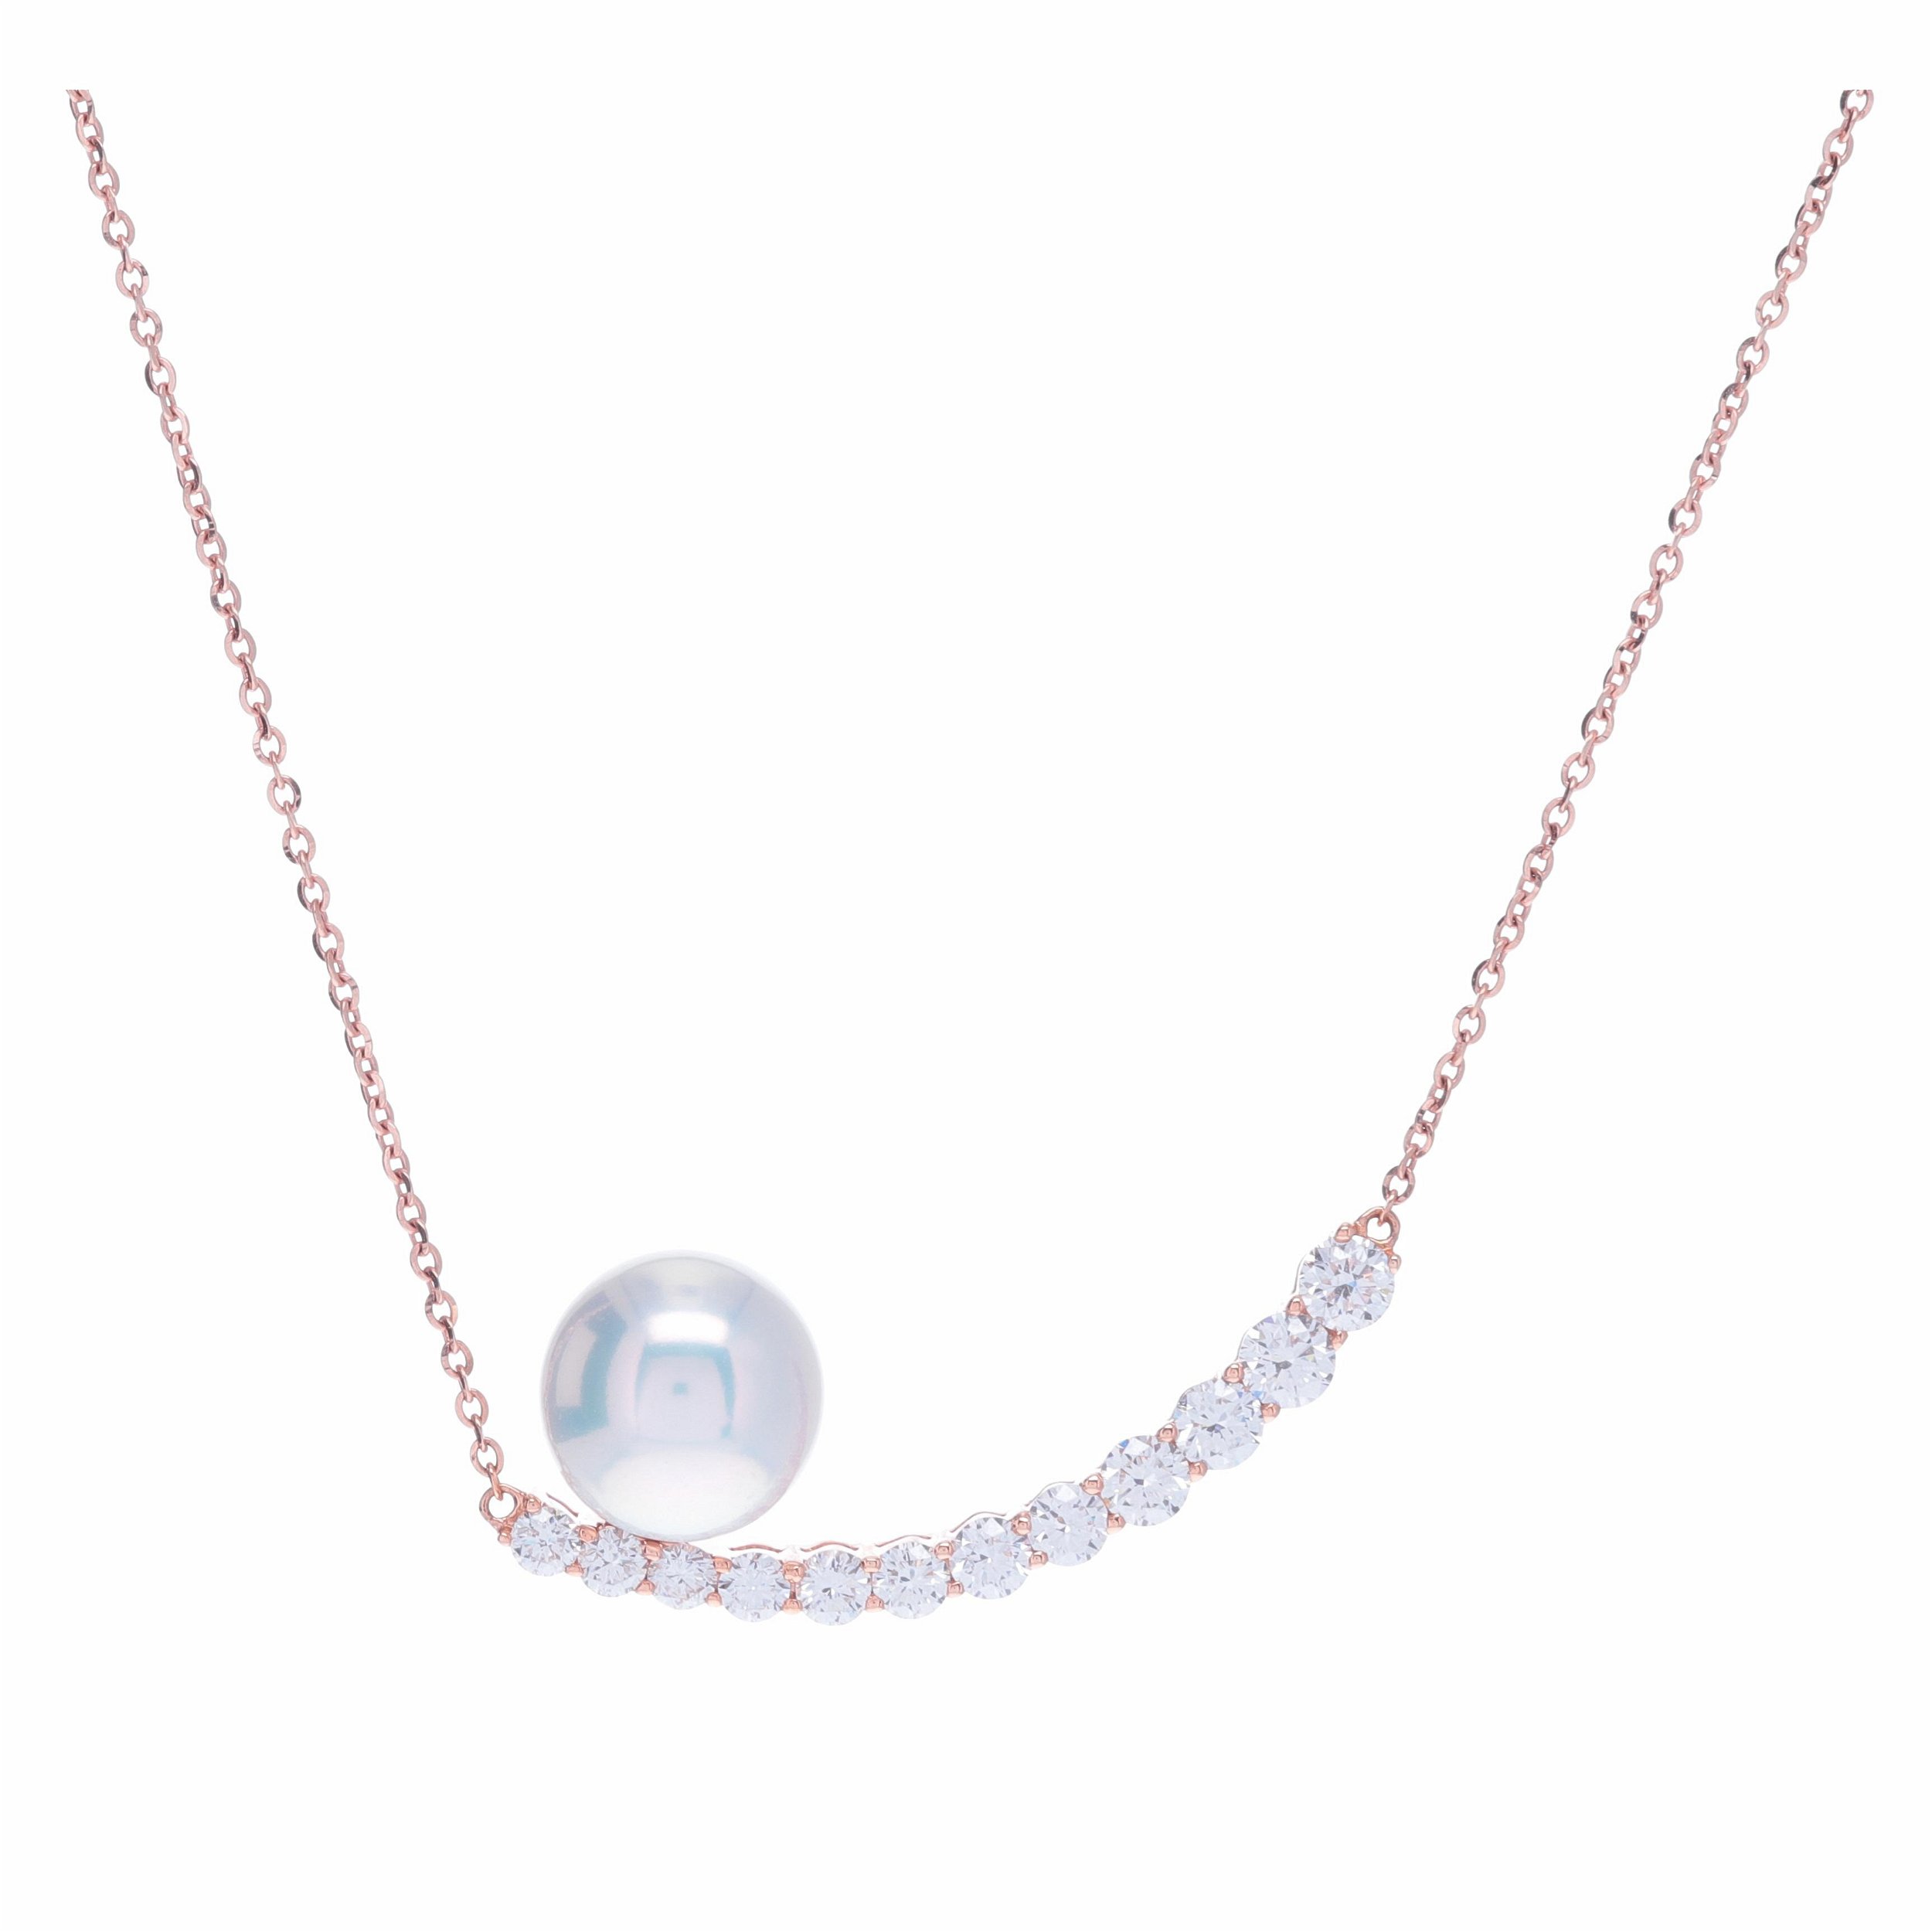 18k Rose Gold Diamond Crescent Pendant Necklace with Pearl Detail